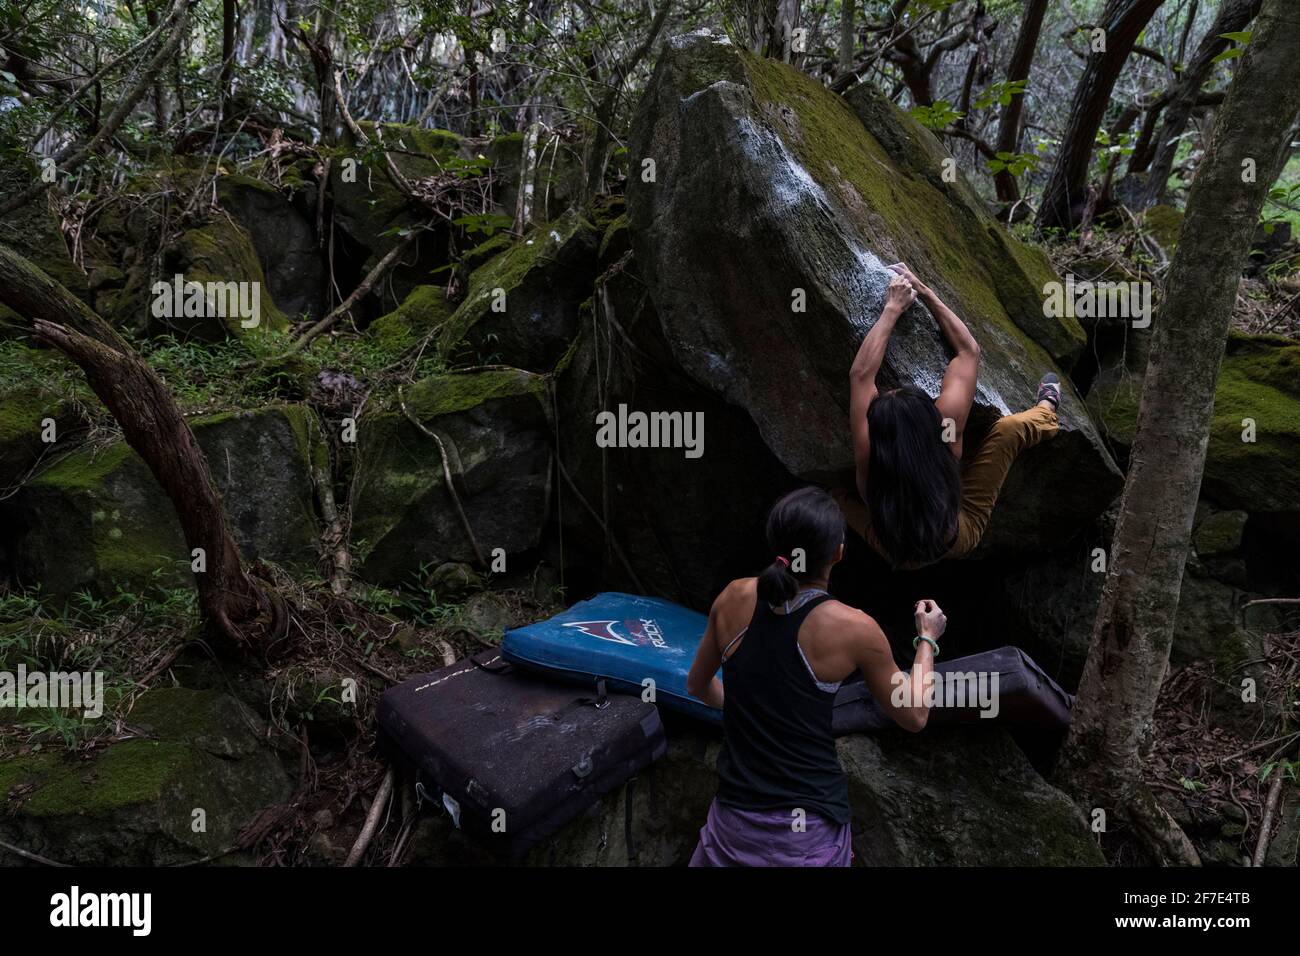 Two athletic women taking turns bouldering a mossy rock in Oahu Stock Photo